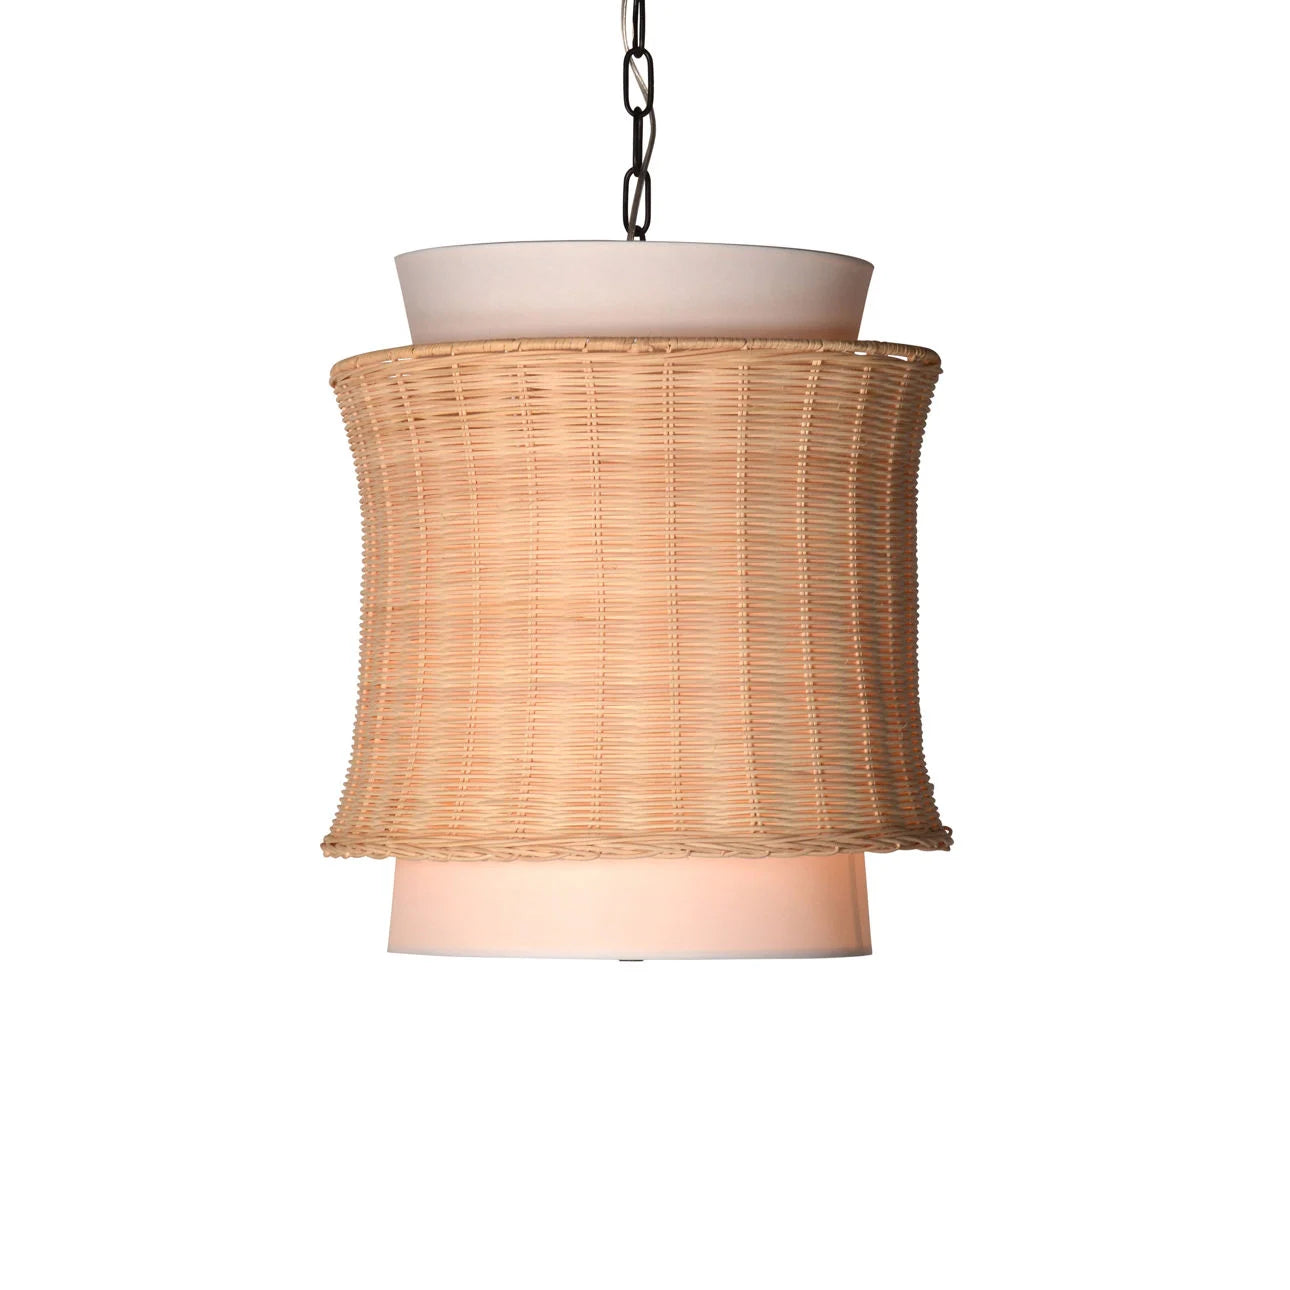 Made of fabric and beautifully natural woven rattan, the Chrisley Pendant Light is a wonderfully modern and airy fixture to hang above your kitchen island or bedroom nightstands. Amethyst Home provides interior design services, furniture, rugs, and lighting in the Miami metro area.